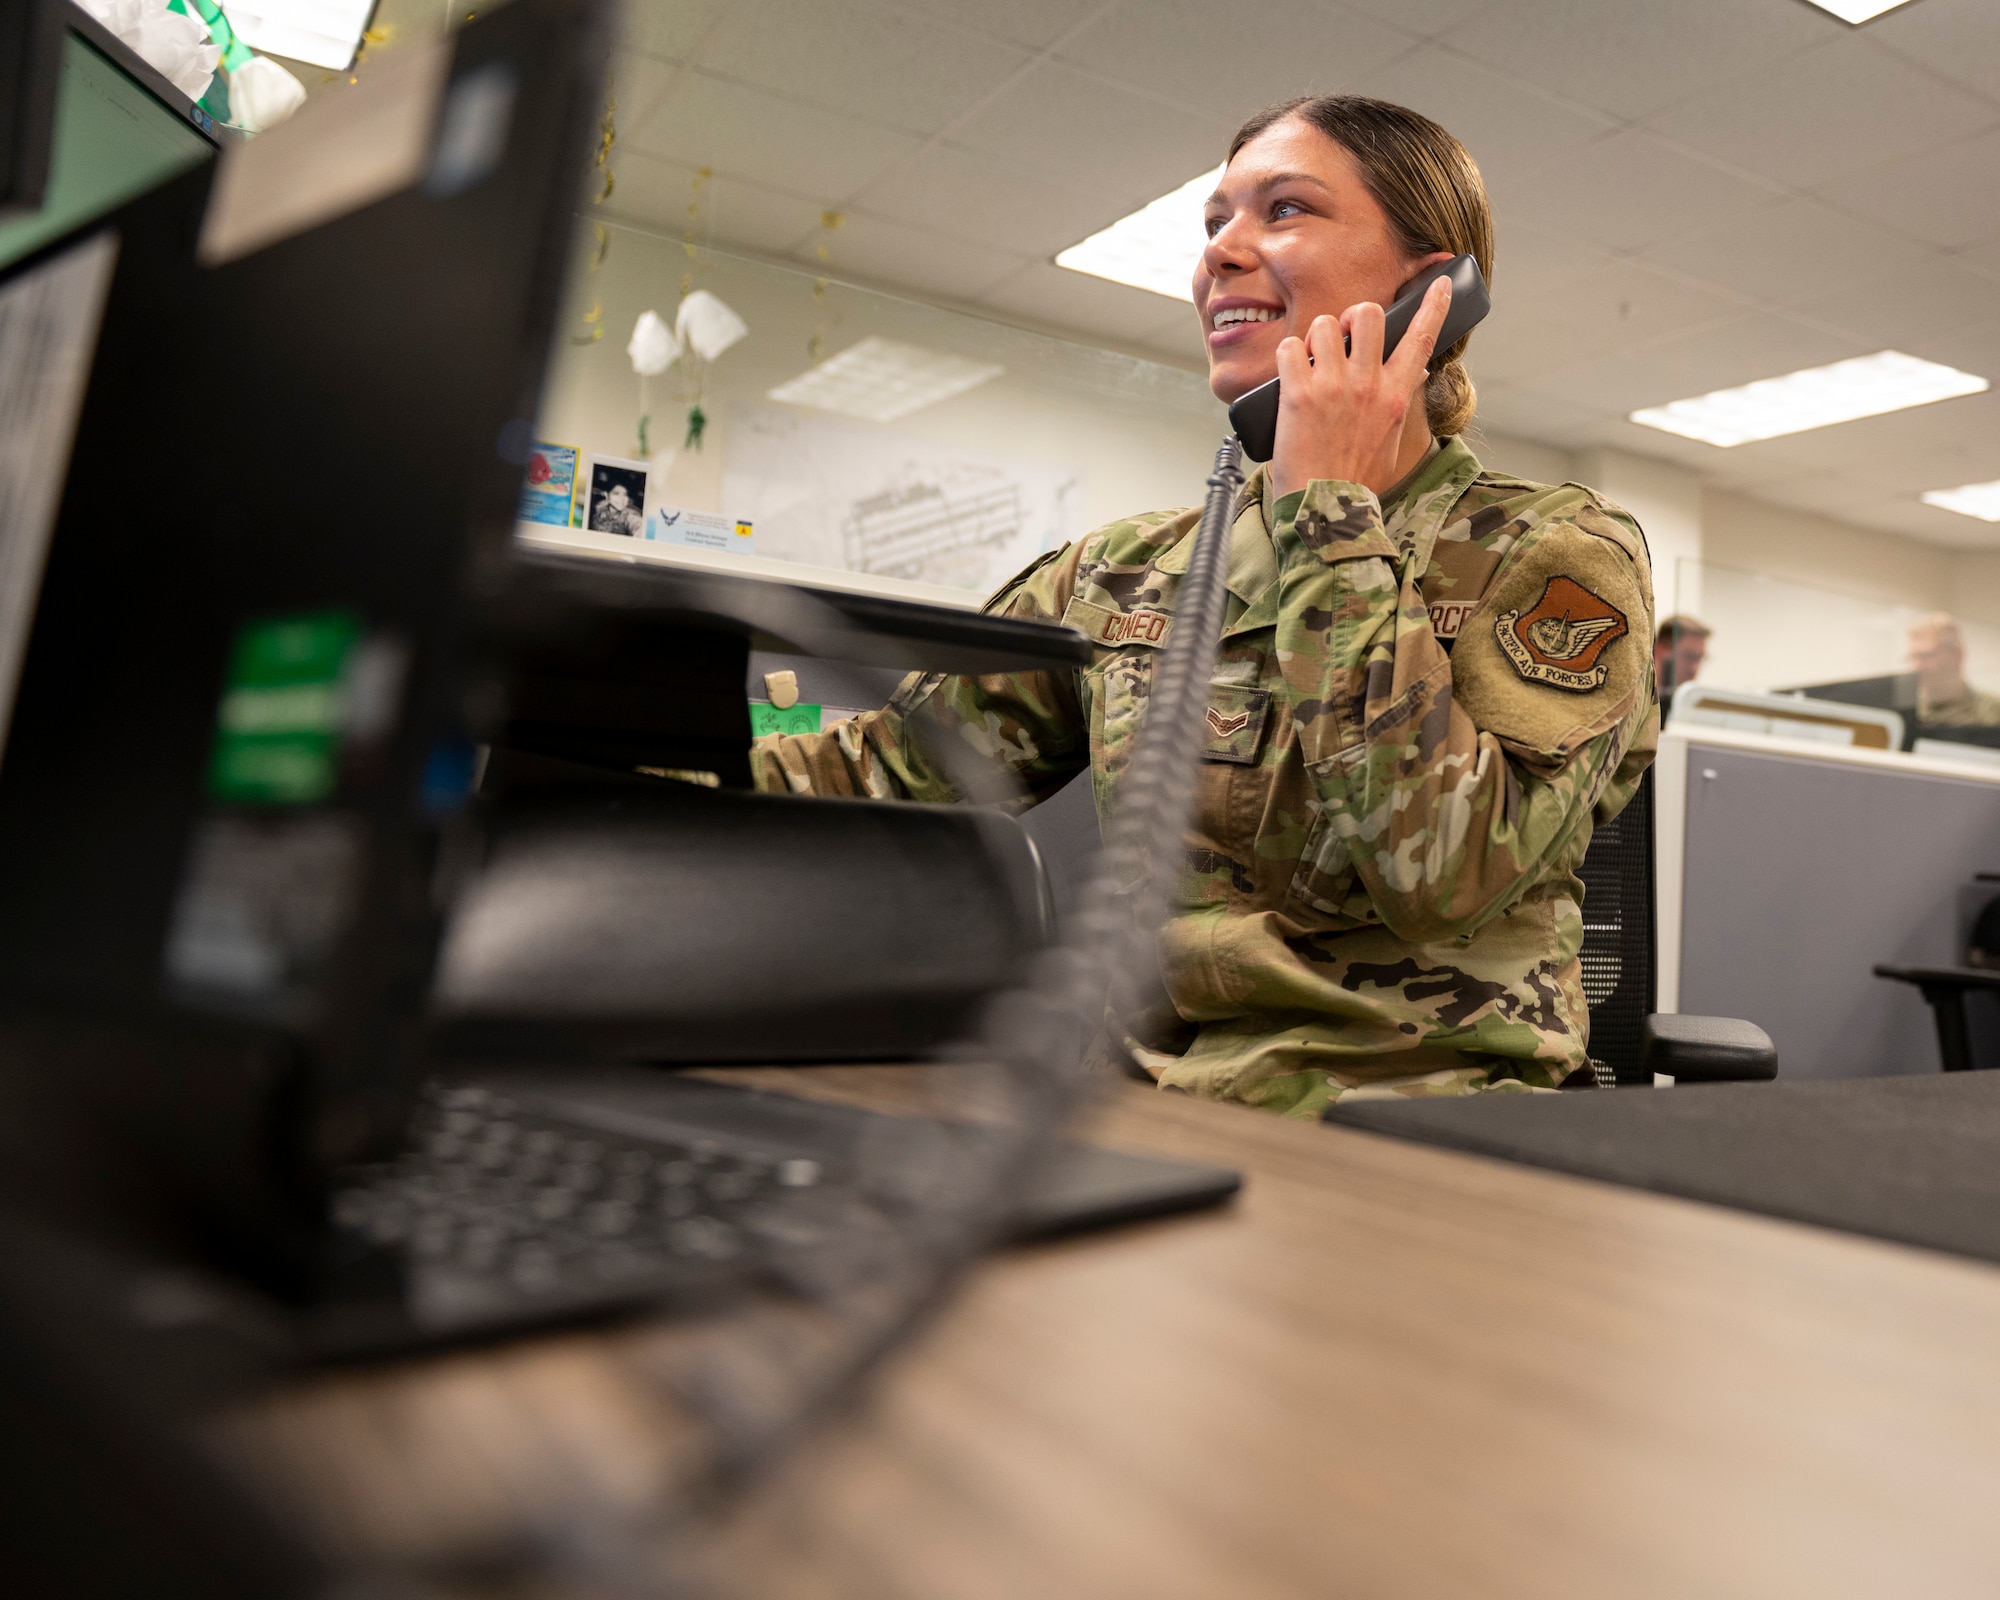 U.S. Air Force Airman 1st Class Liel Cuneo, 36th Contracting Squadron contracting specialist, answers a phone call from a customer on Andersen Air Force Base, Aug. 23, 2022. Contracting specialists assist contracting officers in purchasing acquisitions by doing market research and making sure it complies with the Federal Acquisitions Regulation. (U.S. Air Force photo by Airman Spencer Perkins)